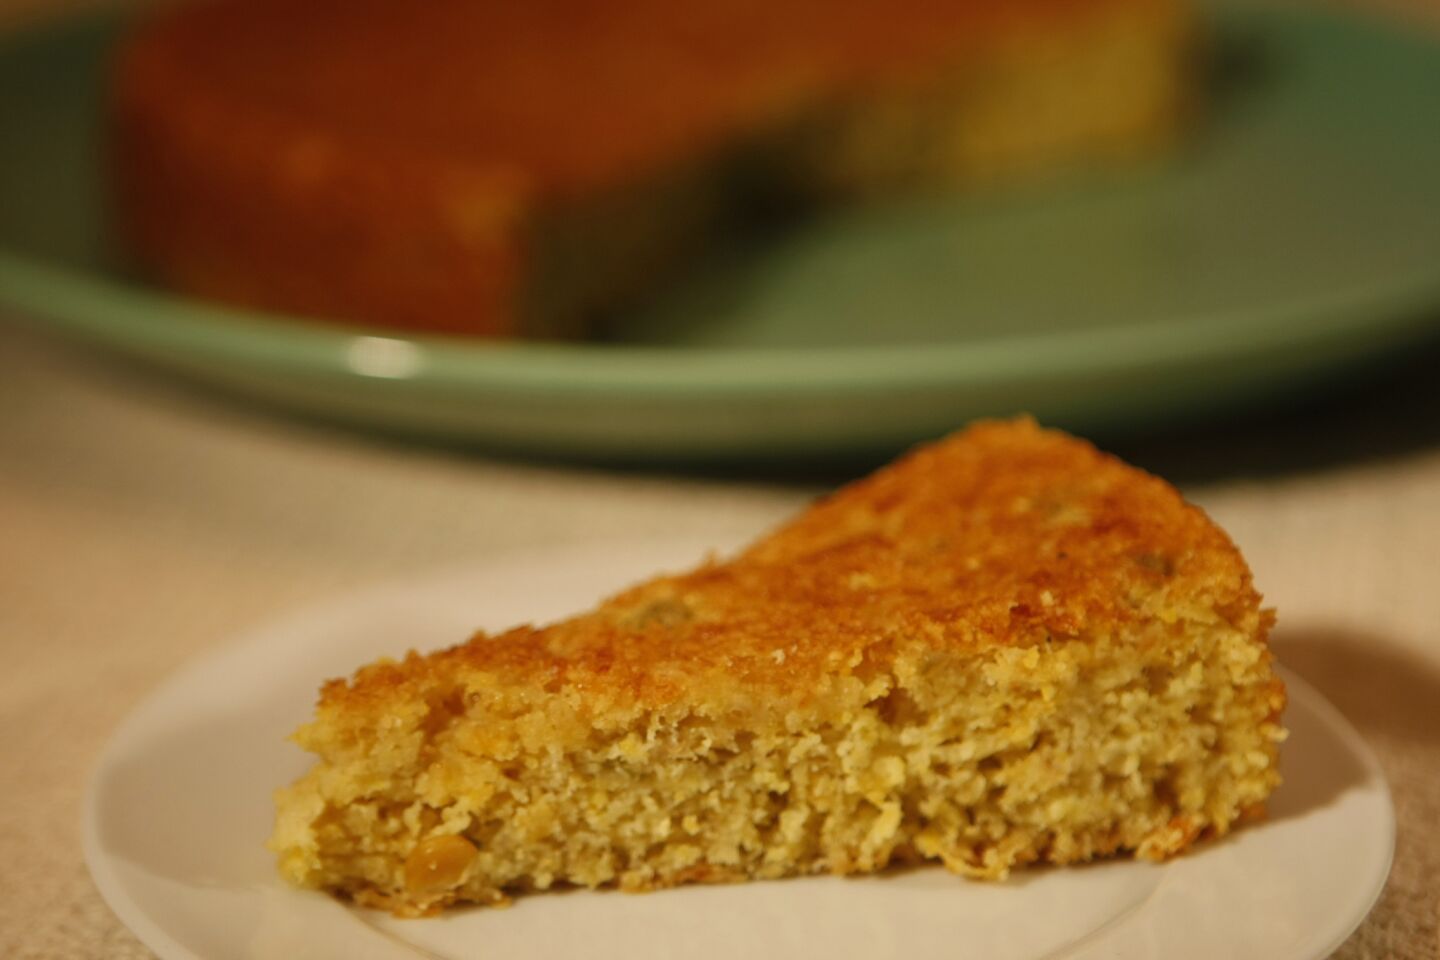 Packed with flavor, this corn bread is made with cheese and chopped chiles, and then finished with a drizzle of honey.